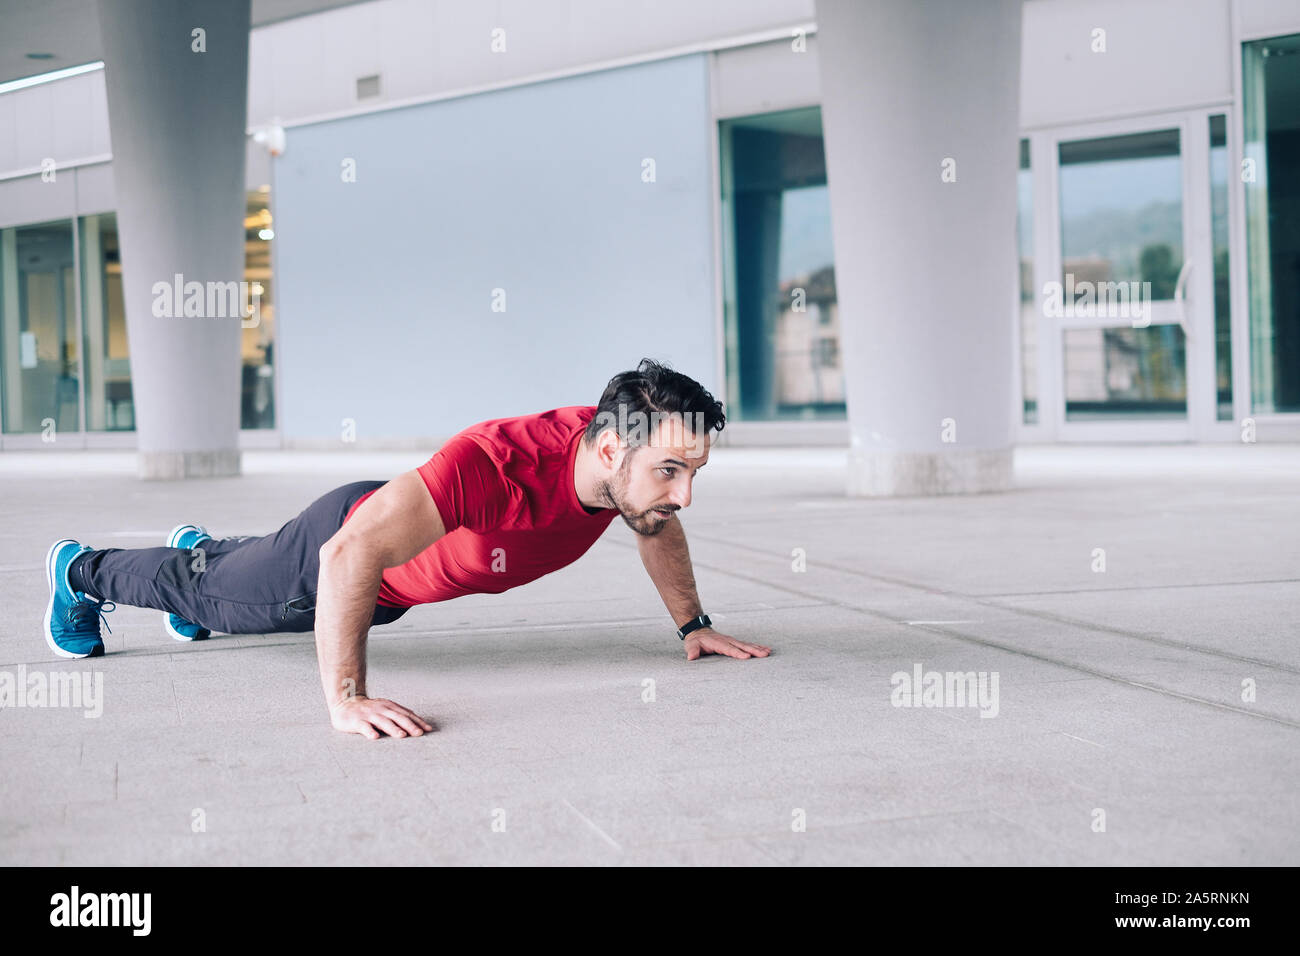 One athlete training with push-up repetitions exercise Stock Photo